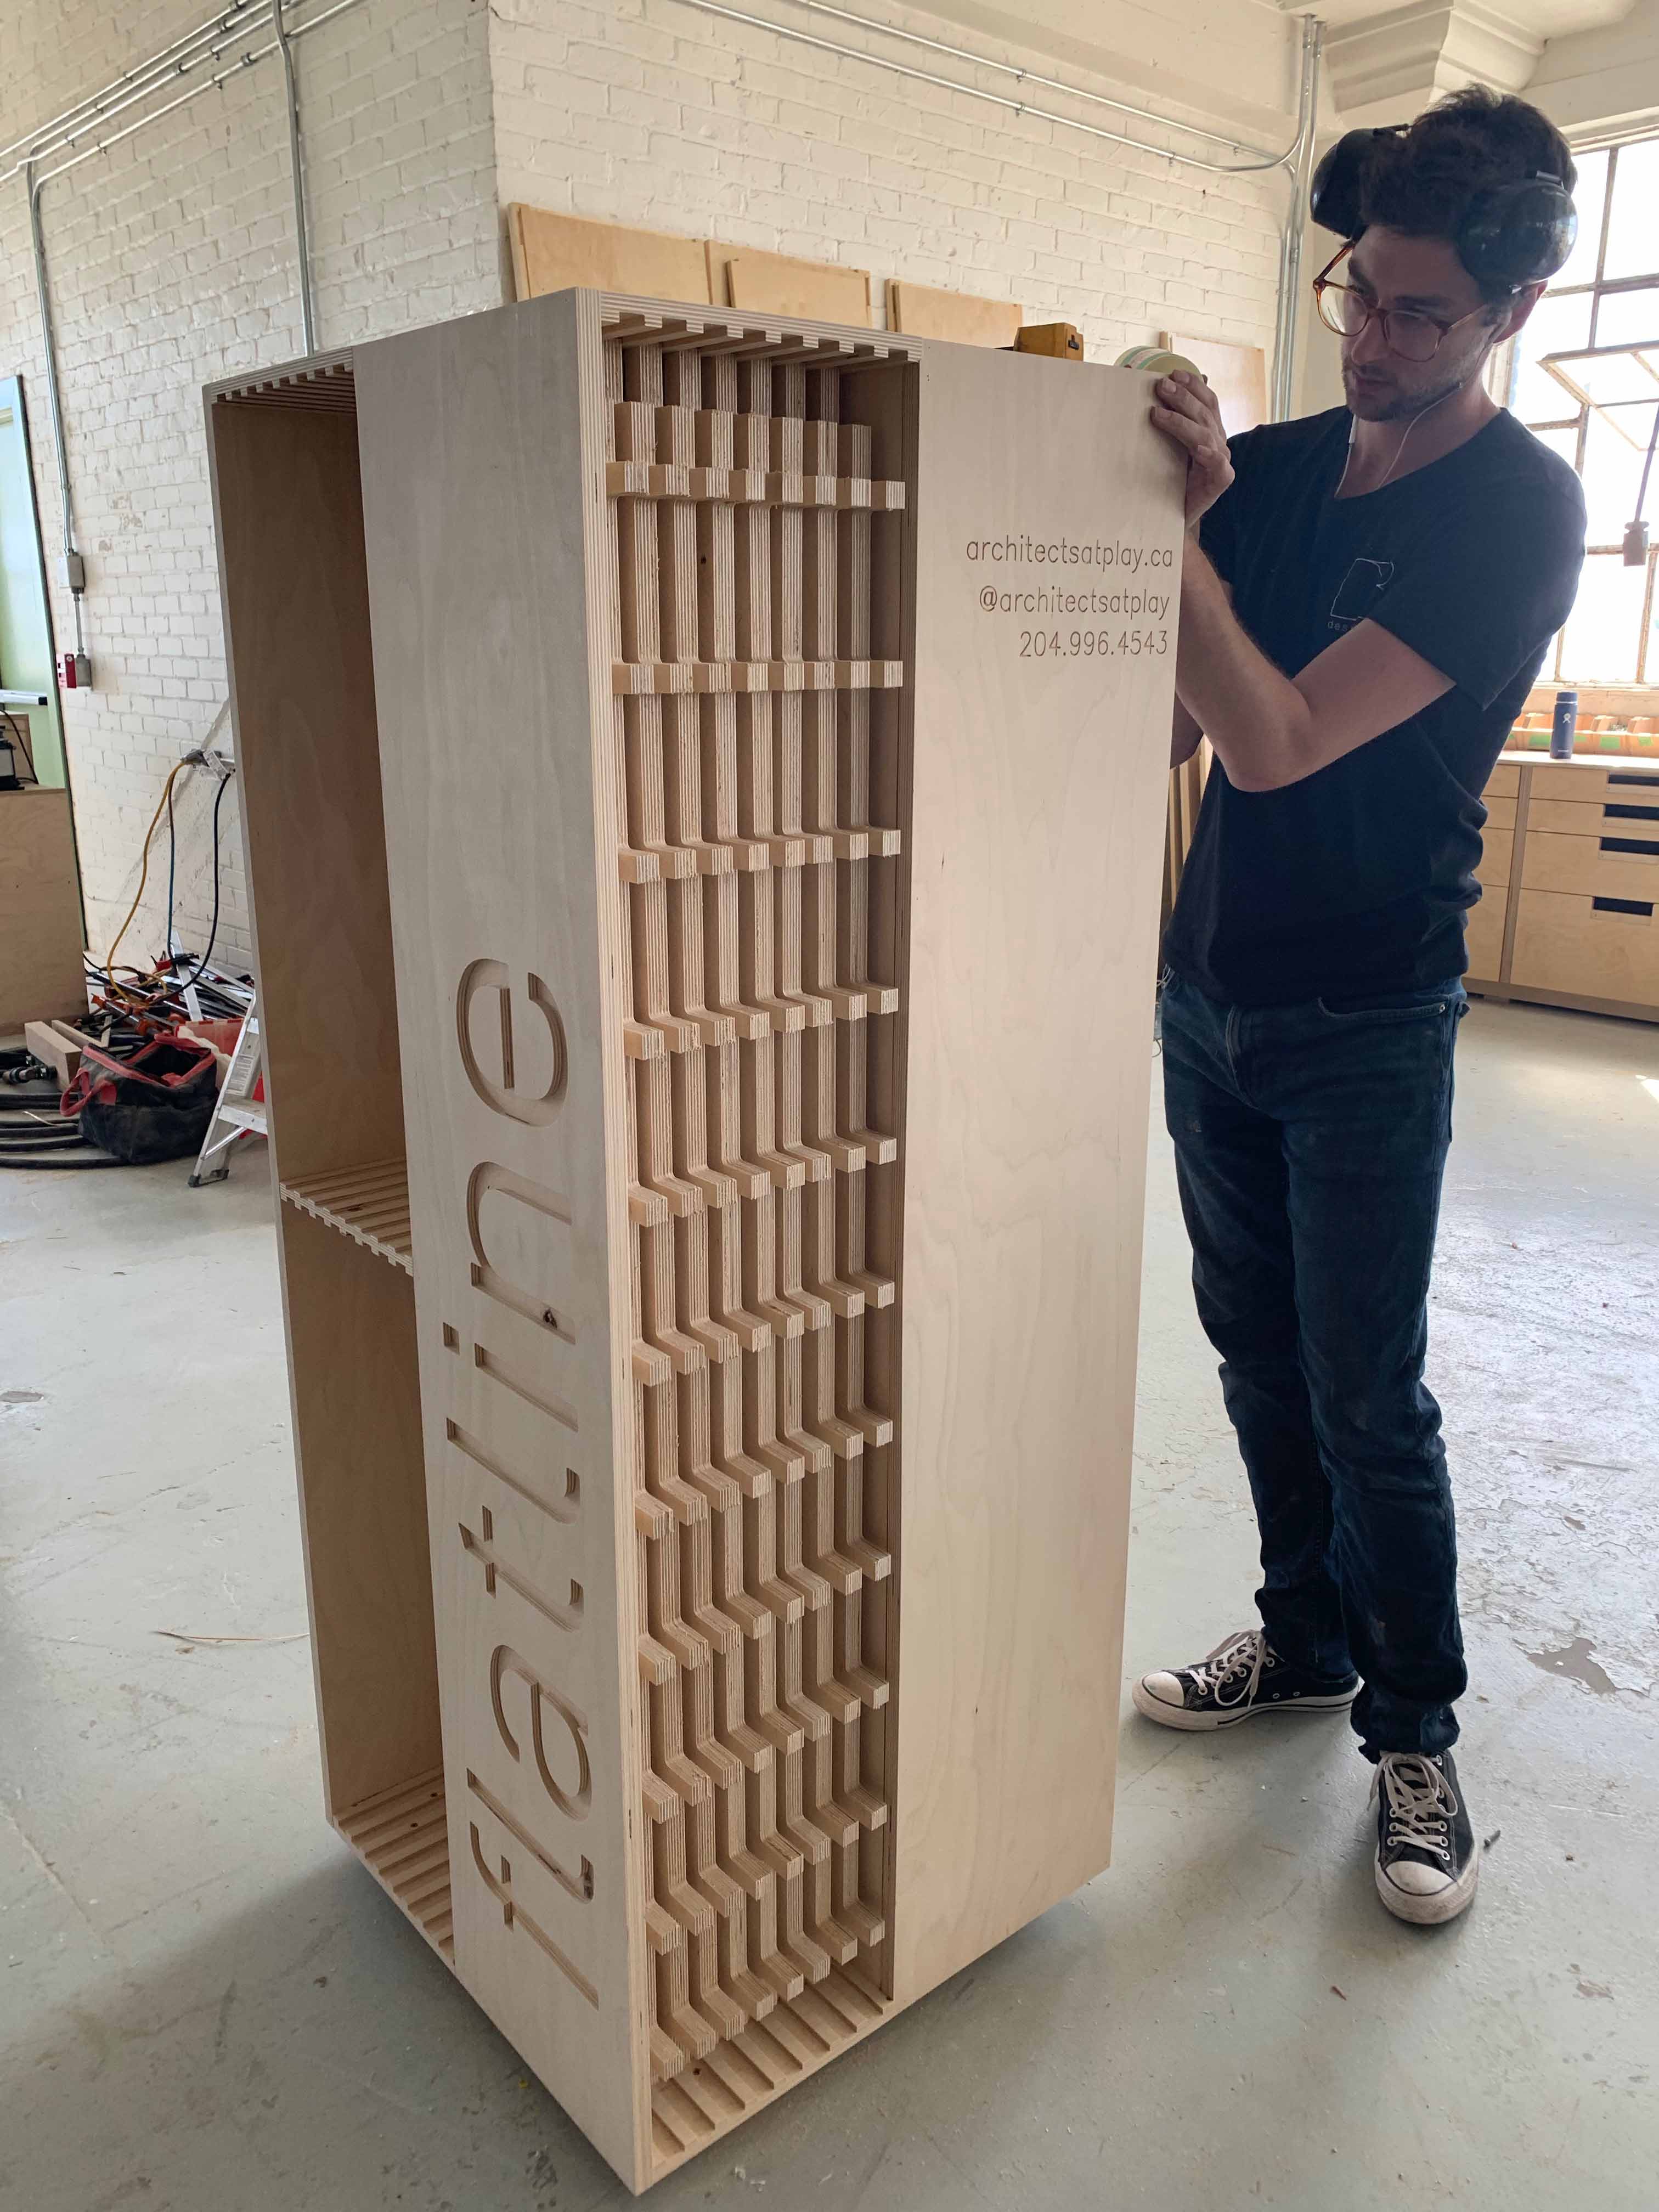 Test fitting the panels in the cabinet at the Design-Built shop